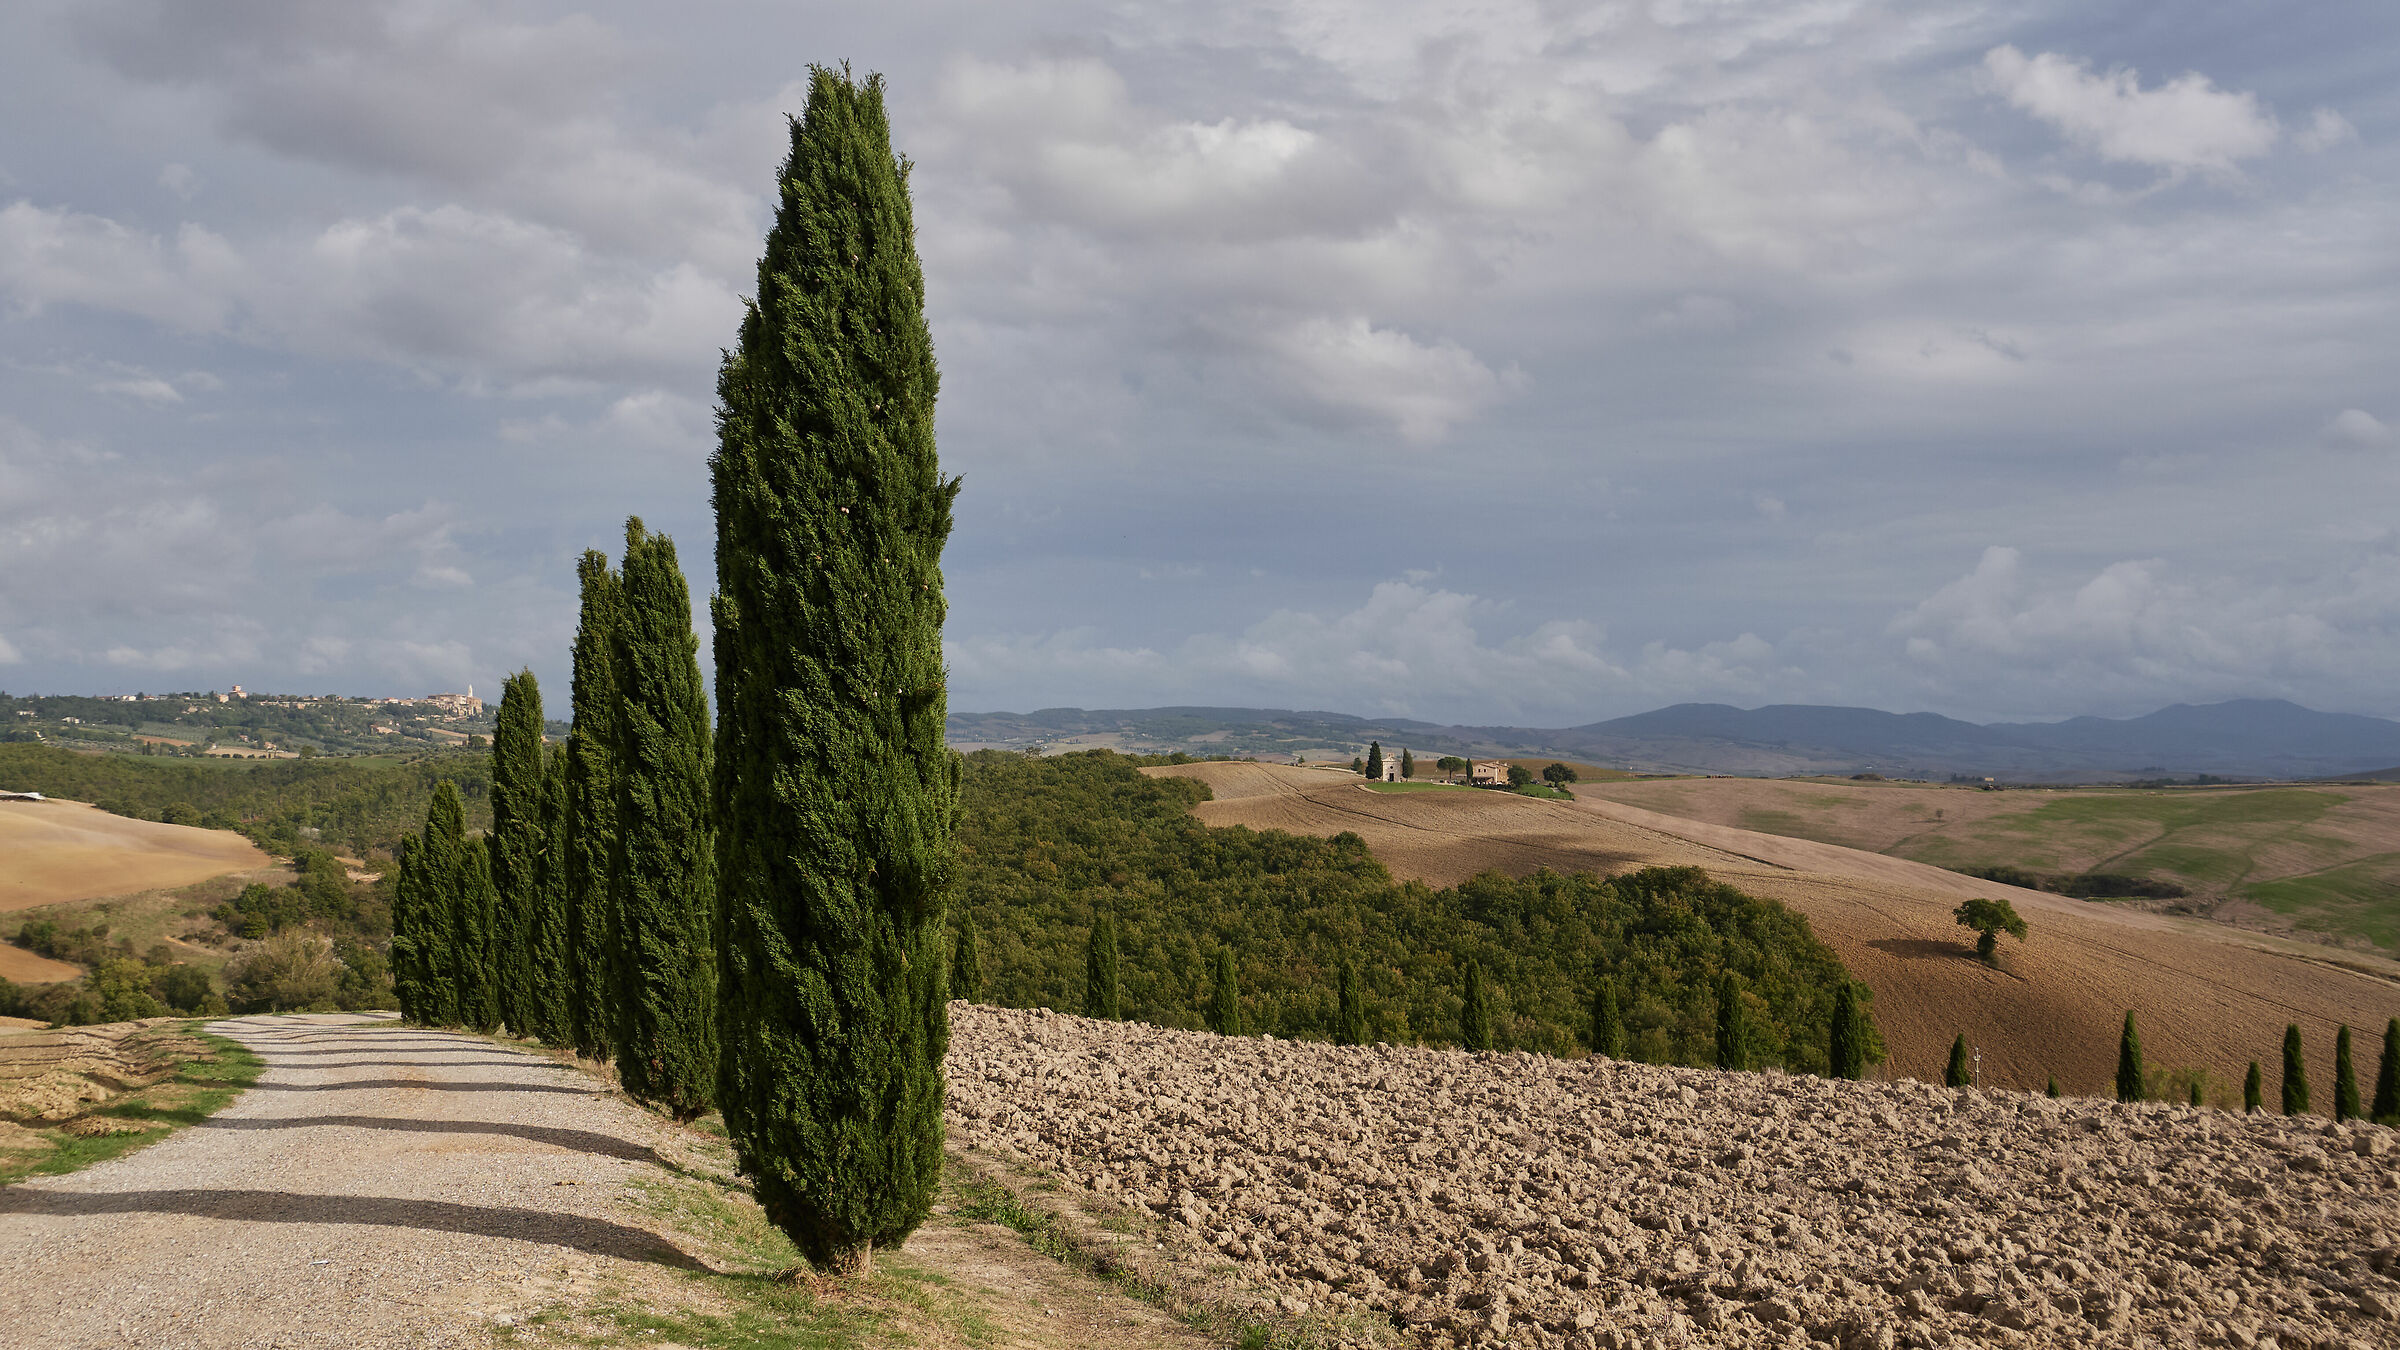 On the way to Pienza...